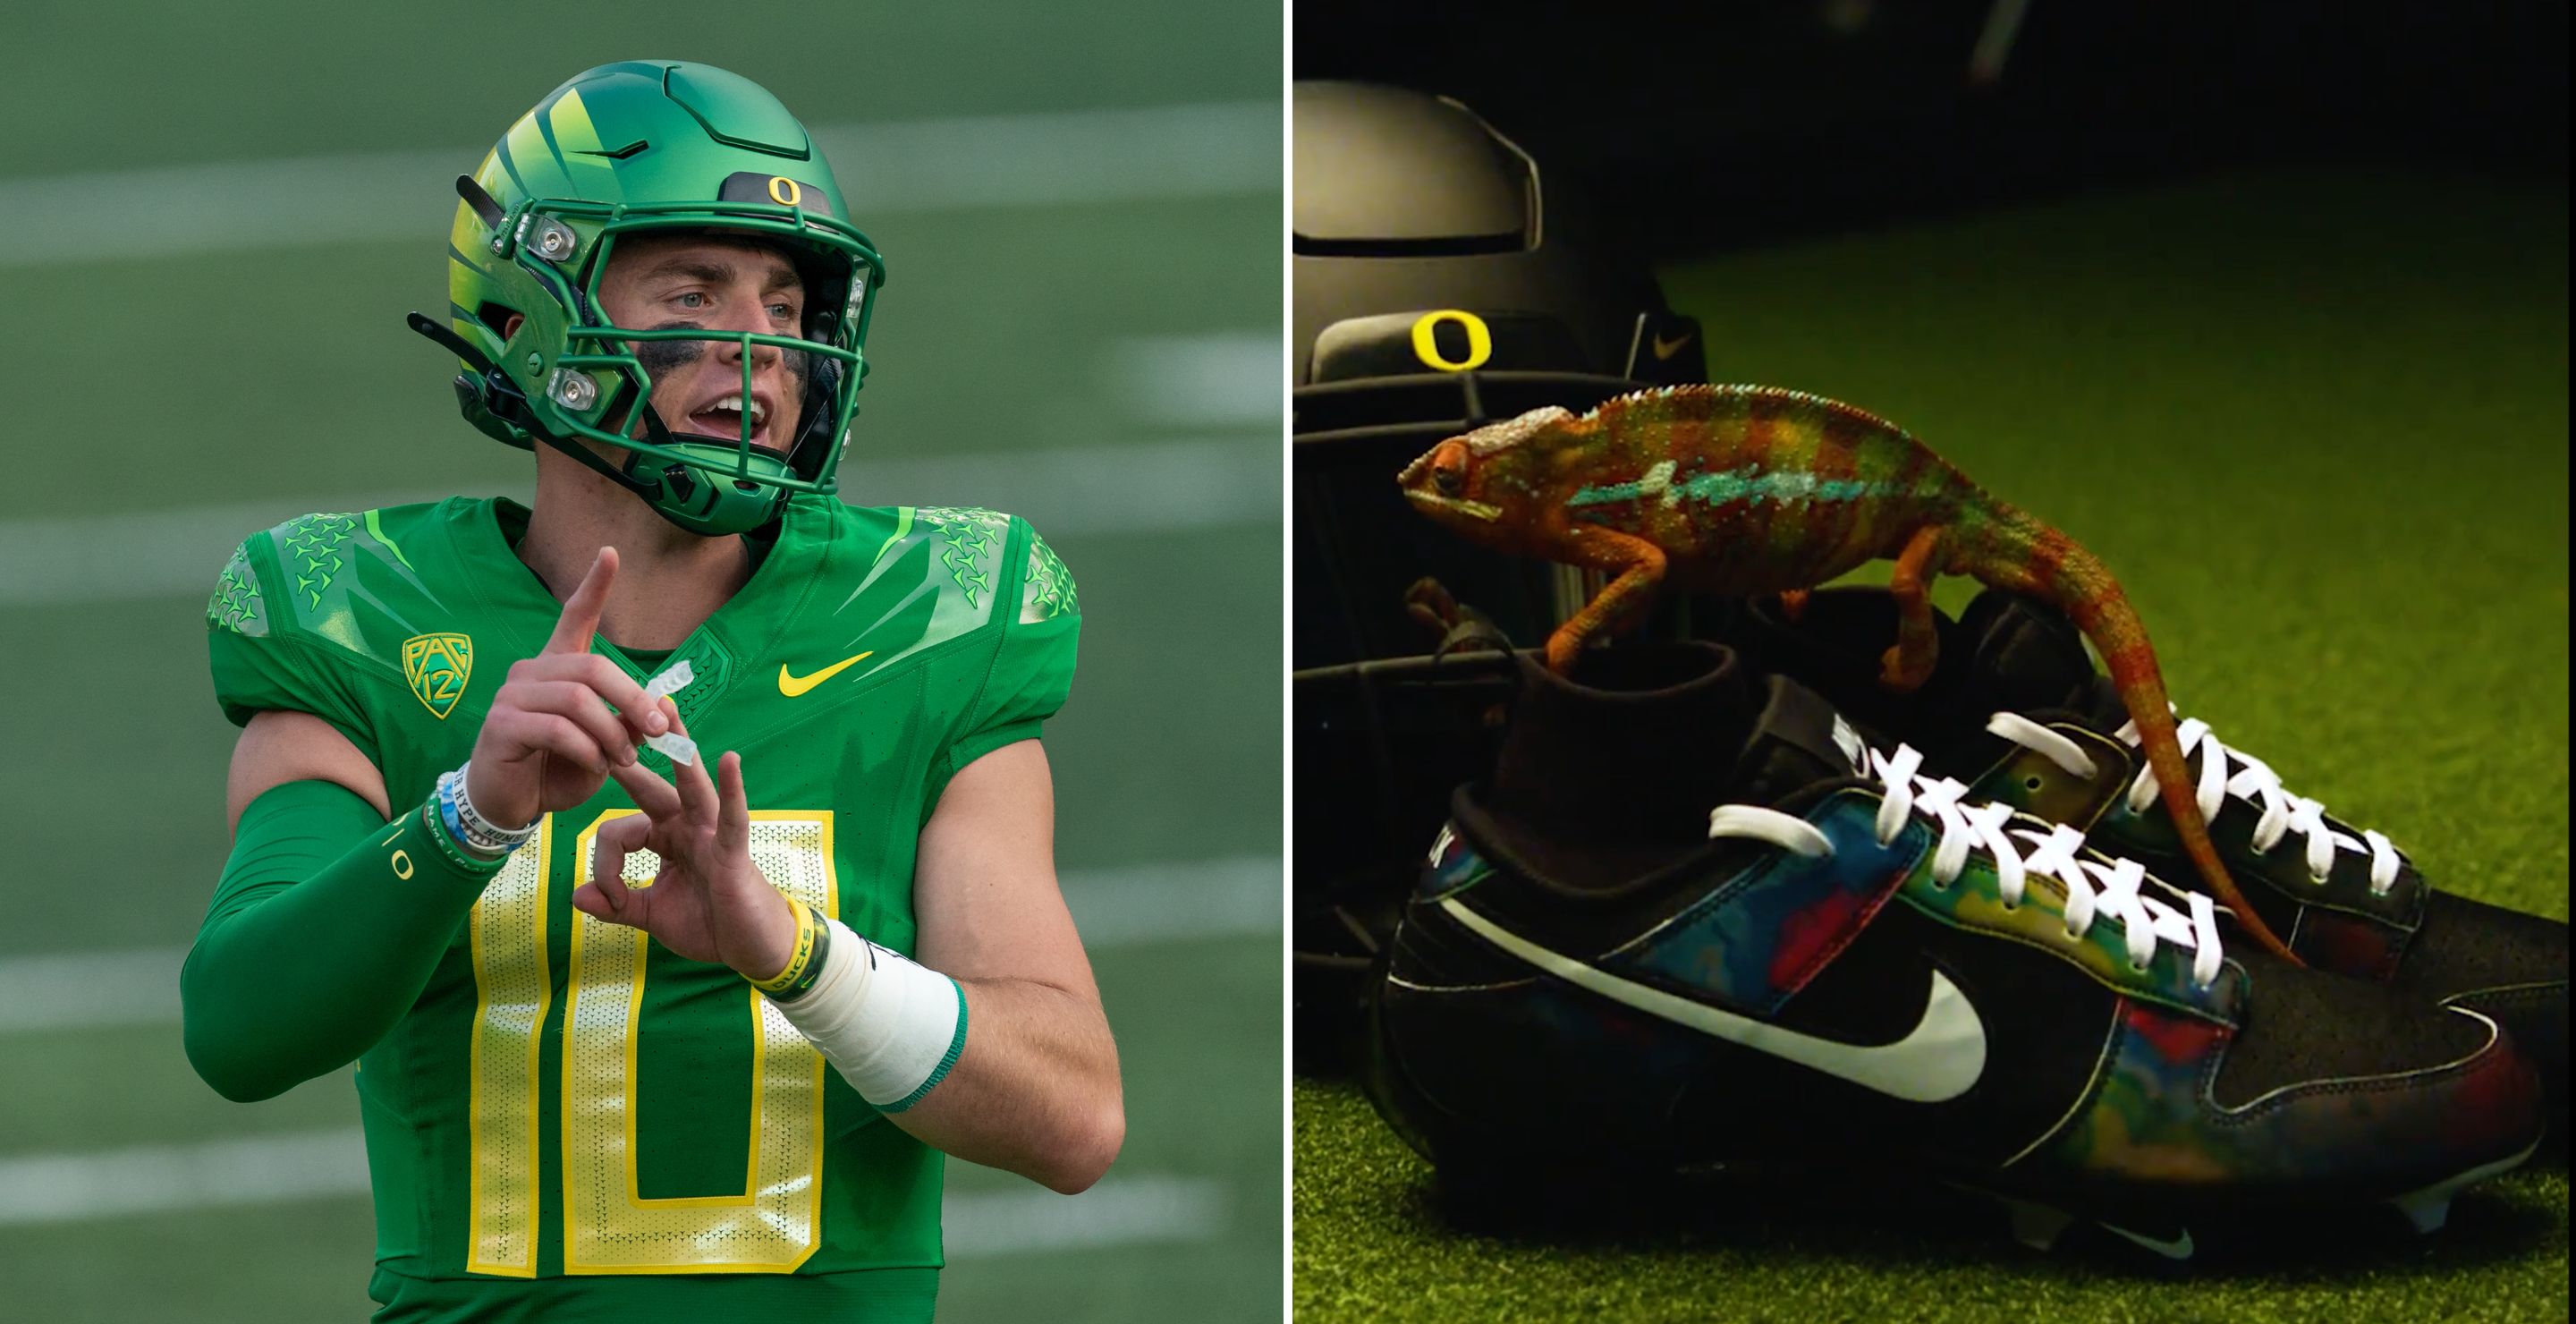 Oregon's cleats will change colors with heat during Colorado game. See what  they look like.